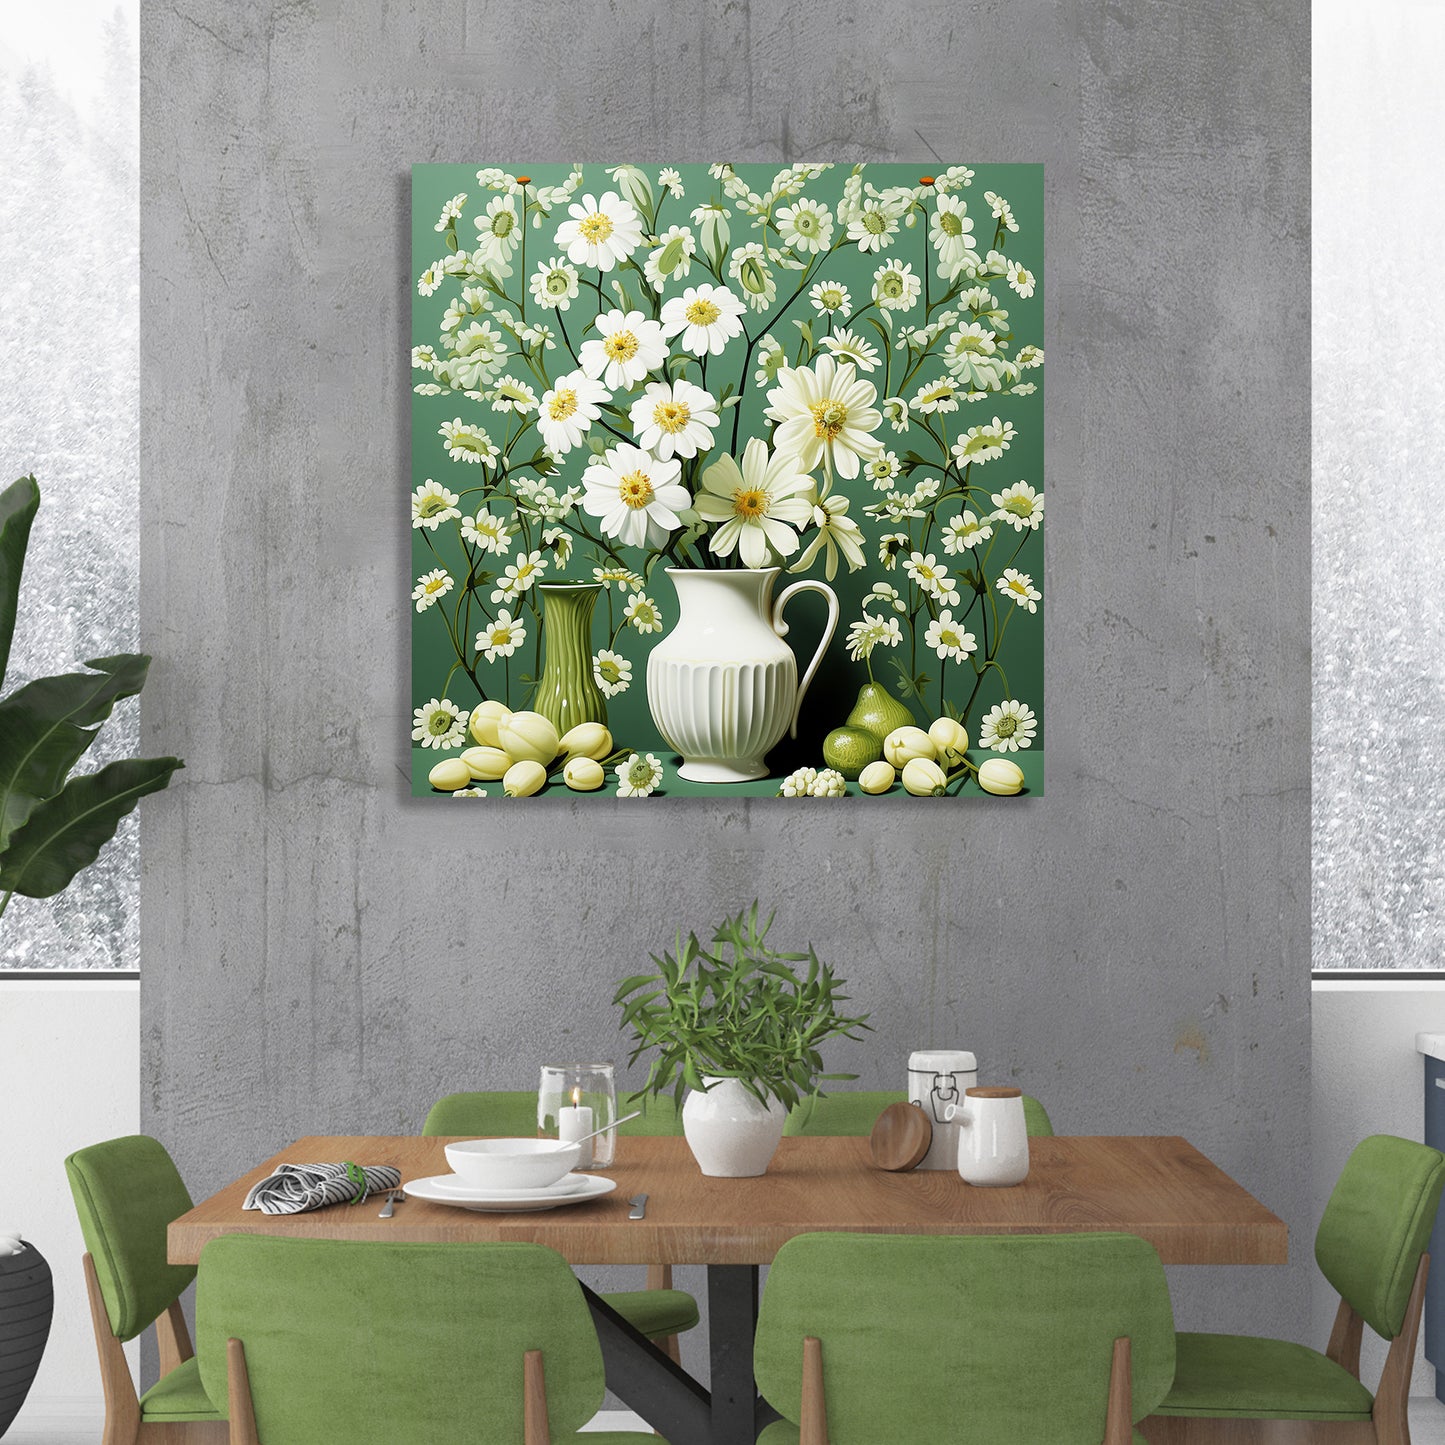 Green and White Floral Art Canvas Painting for Living Room Bedroom Home and Office Wall Decor